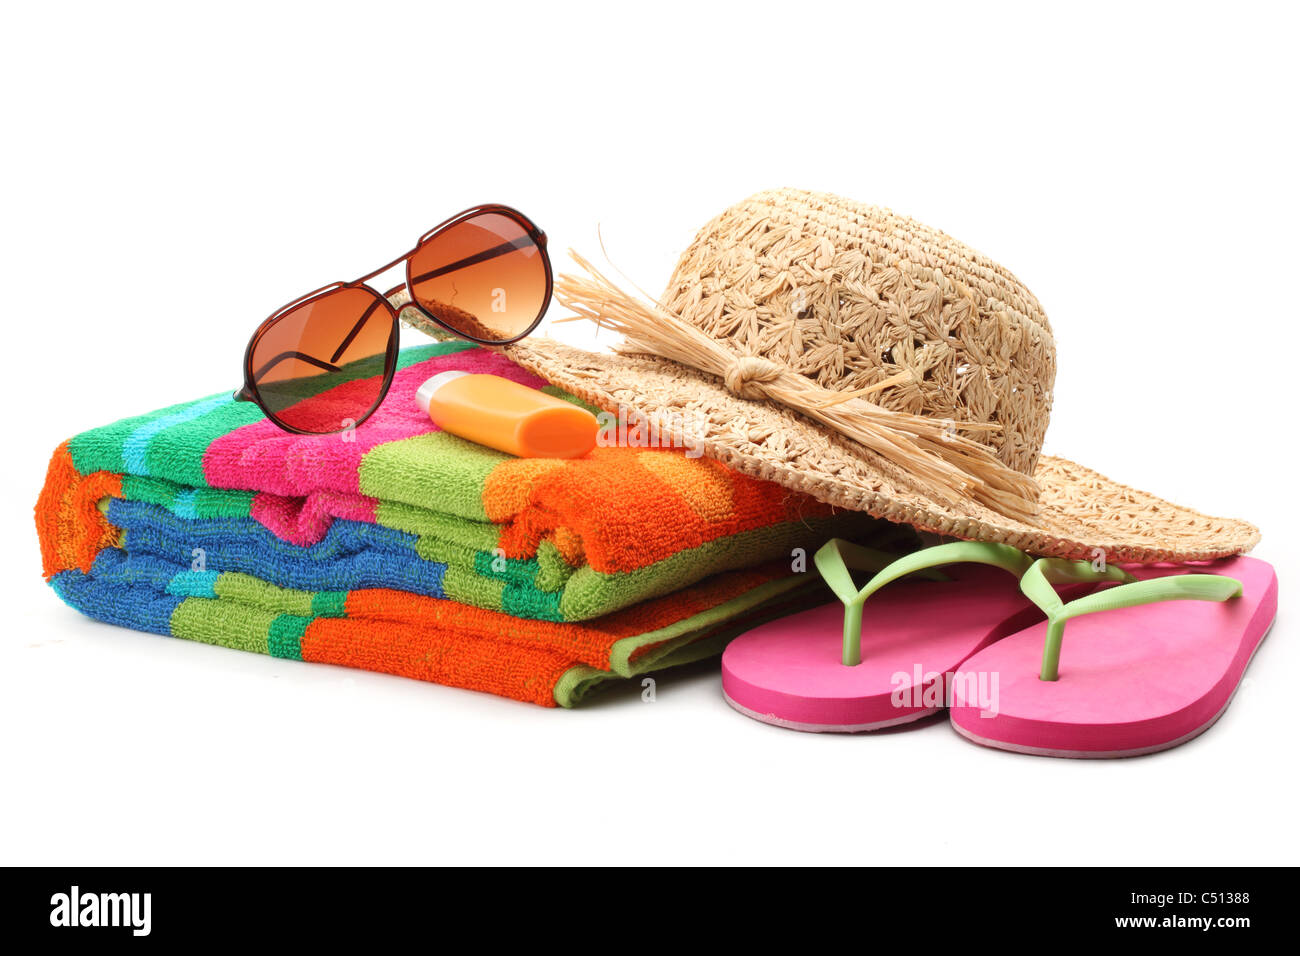 Beach items with straw hat,towel,flip flops and sunglasses.Isolated on white background. Stock Photo